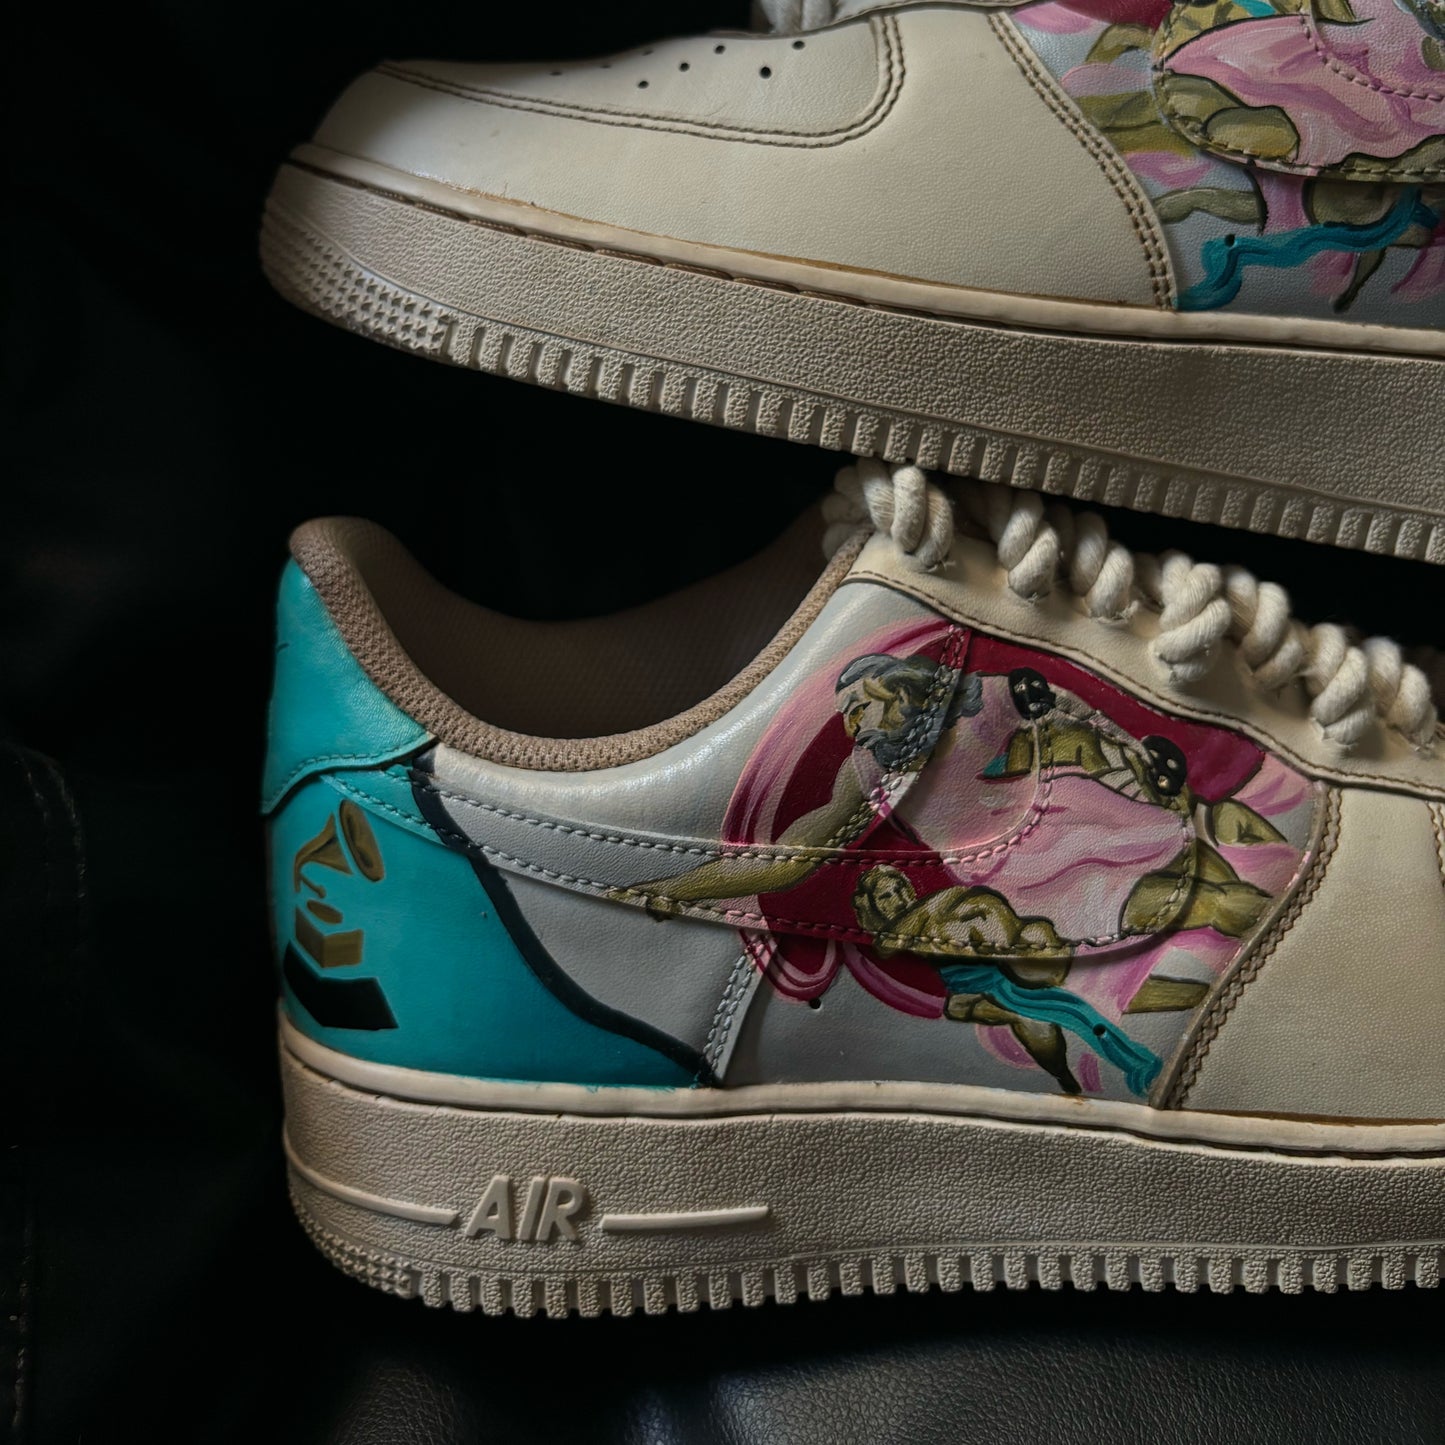 Nike Air Force 1 x The Creation of Adam Inspired